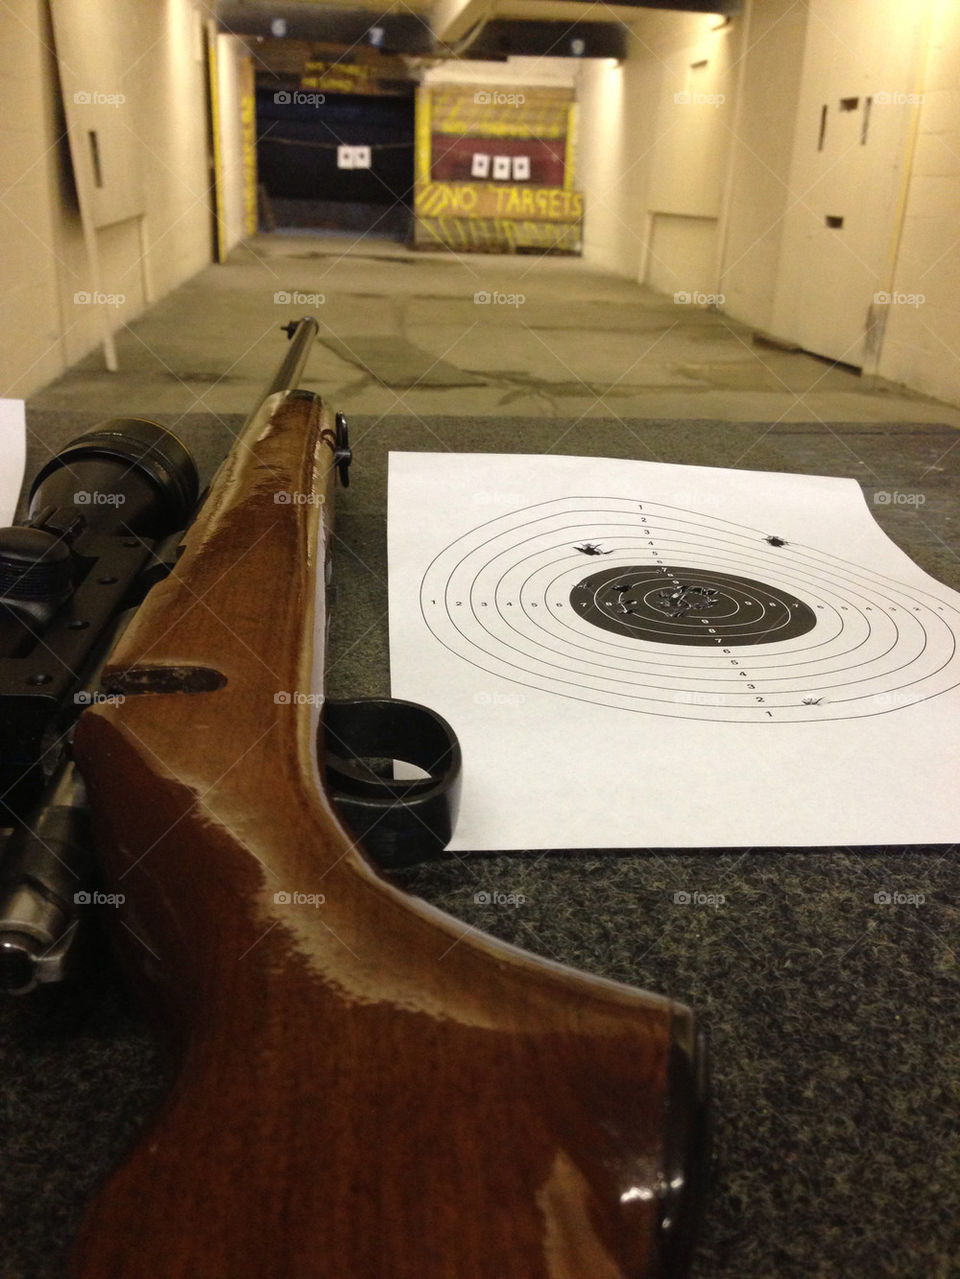 RIFLE AND TARGET